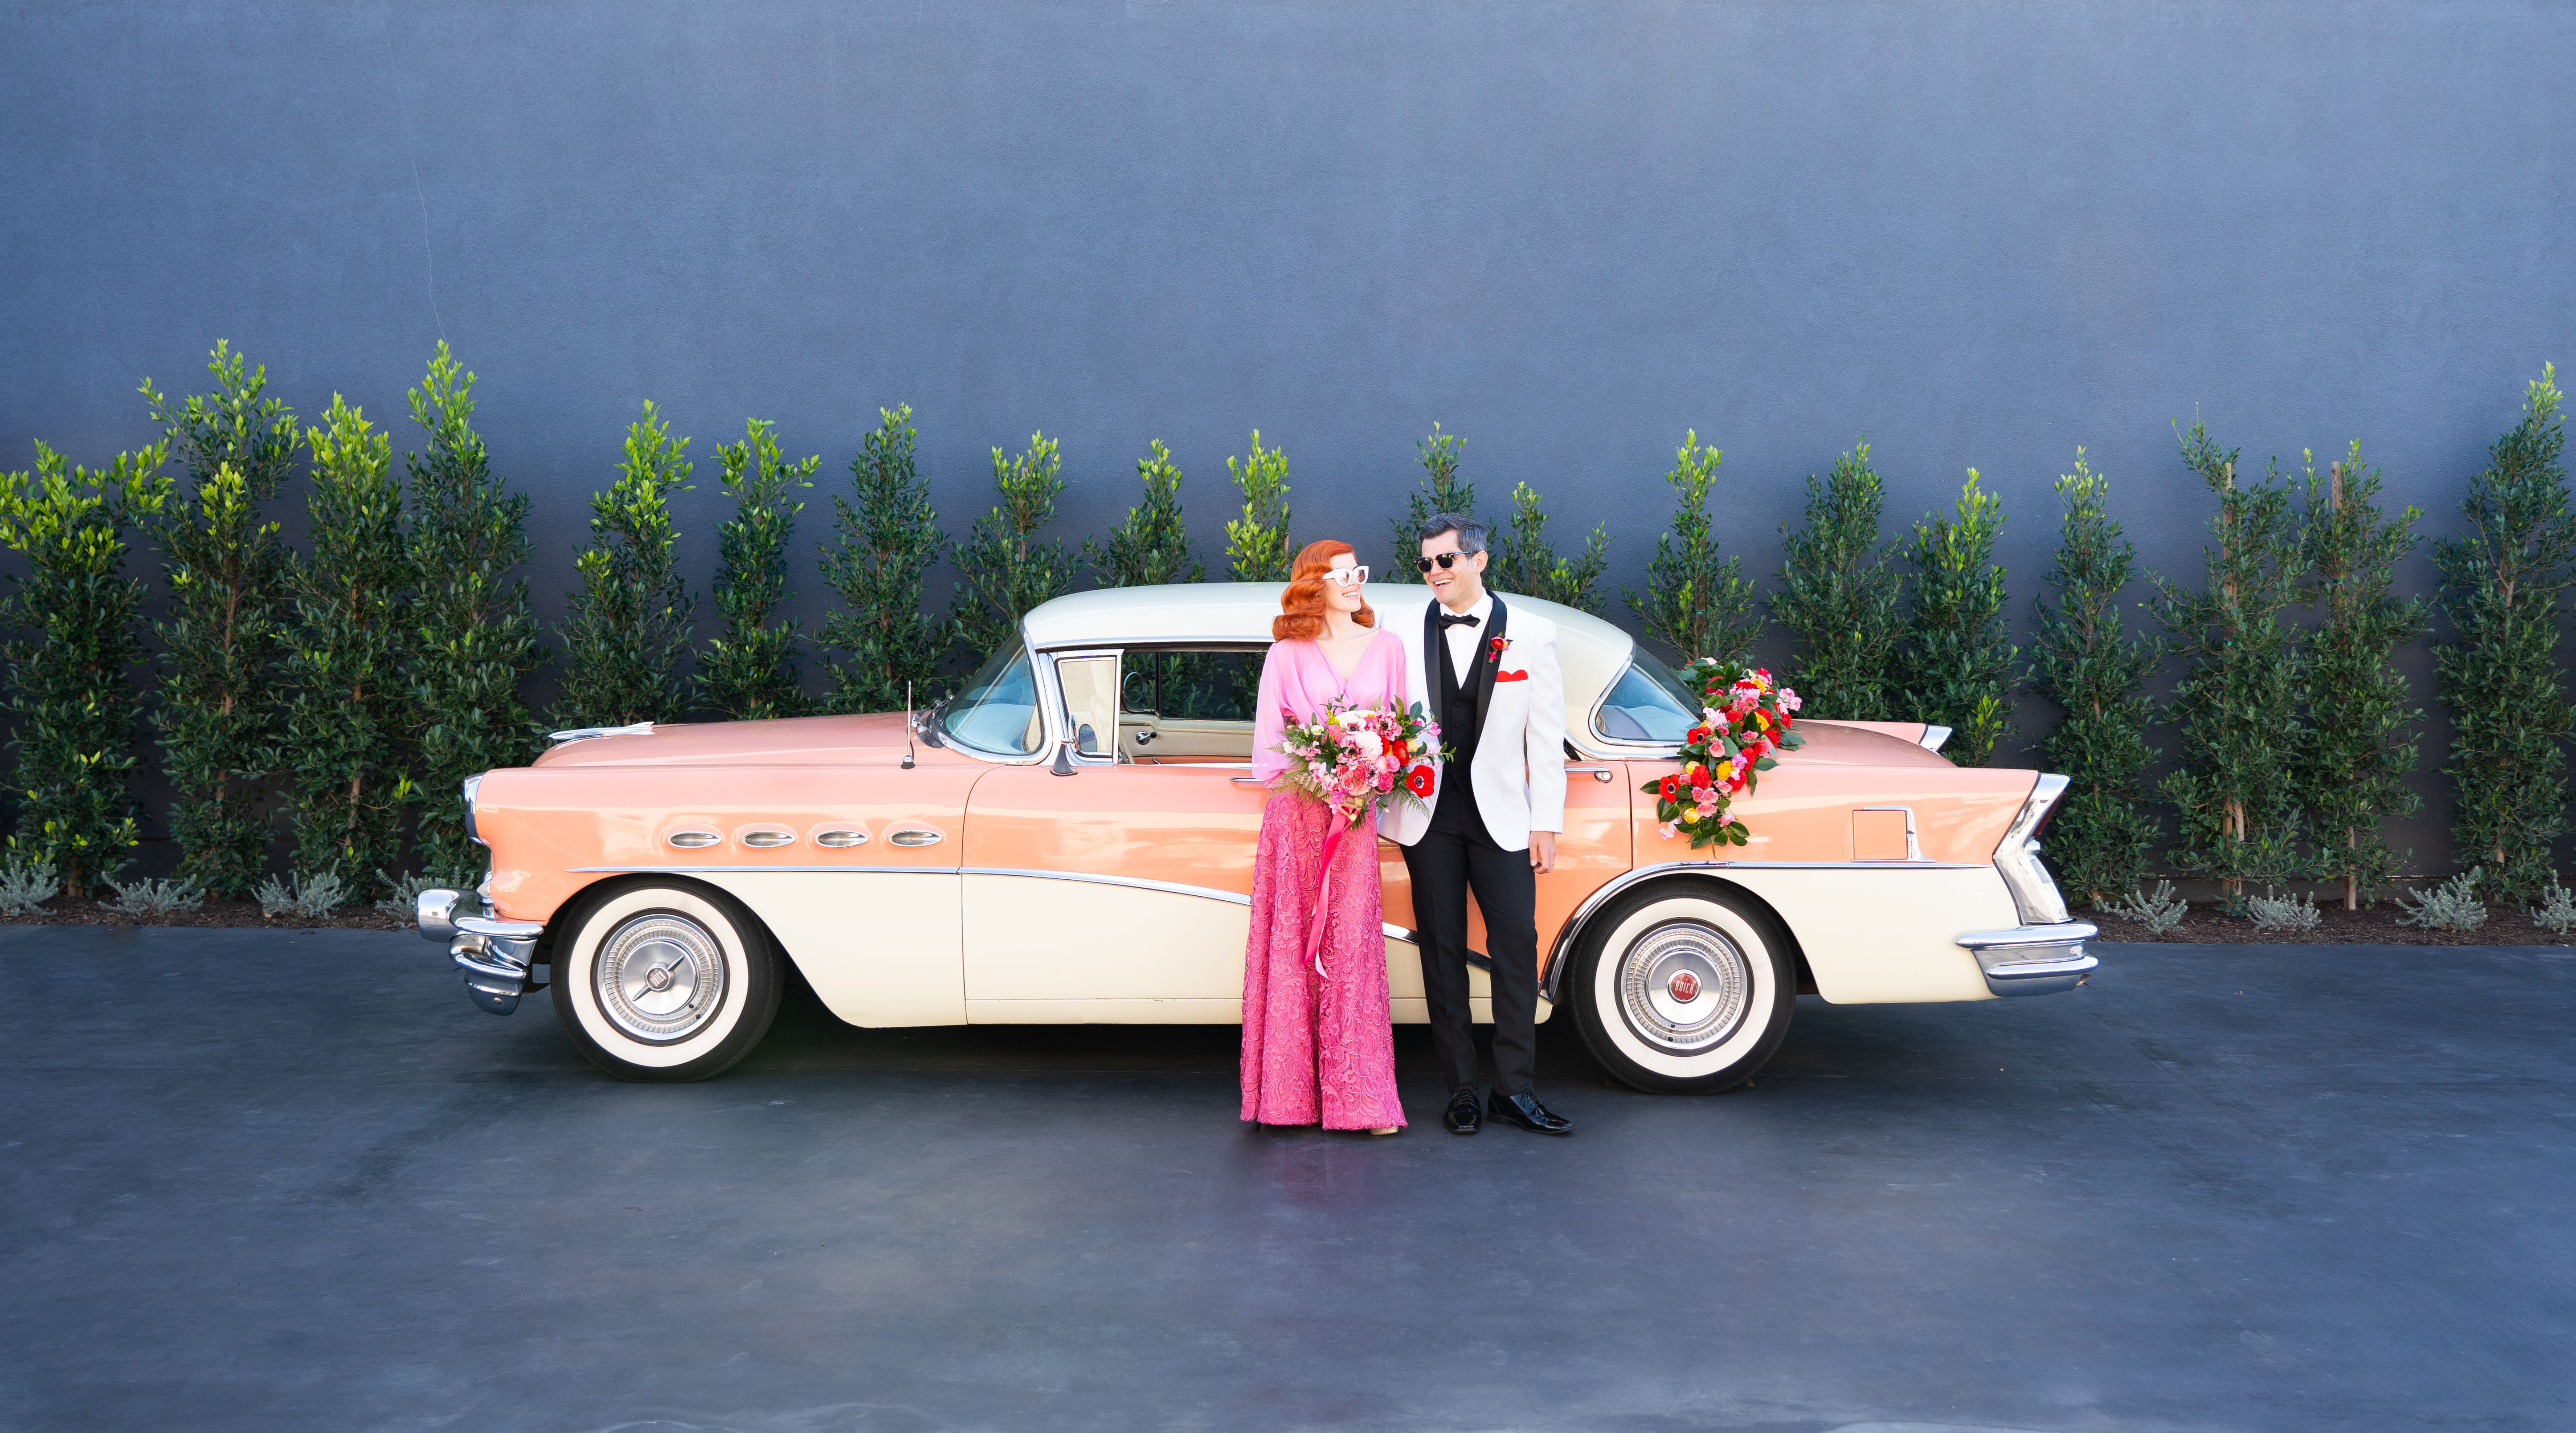 Our quirky sweet couple styled in retro wedding attire to compliment their vintage getaway car a lush red and pink garland to match the vibrant bridal bouquet.